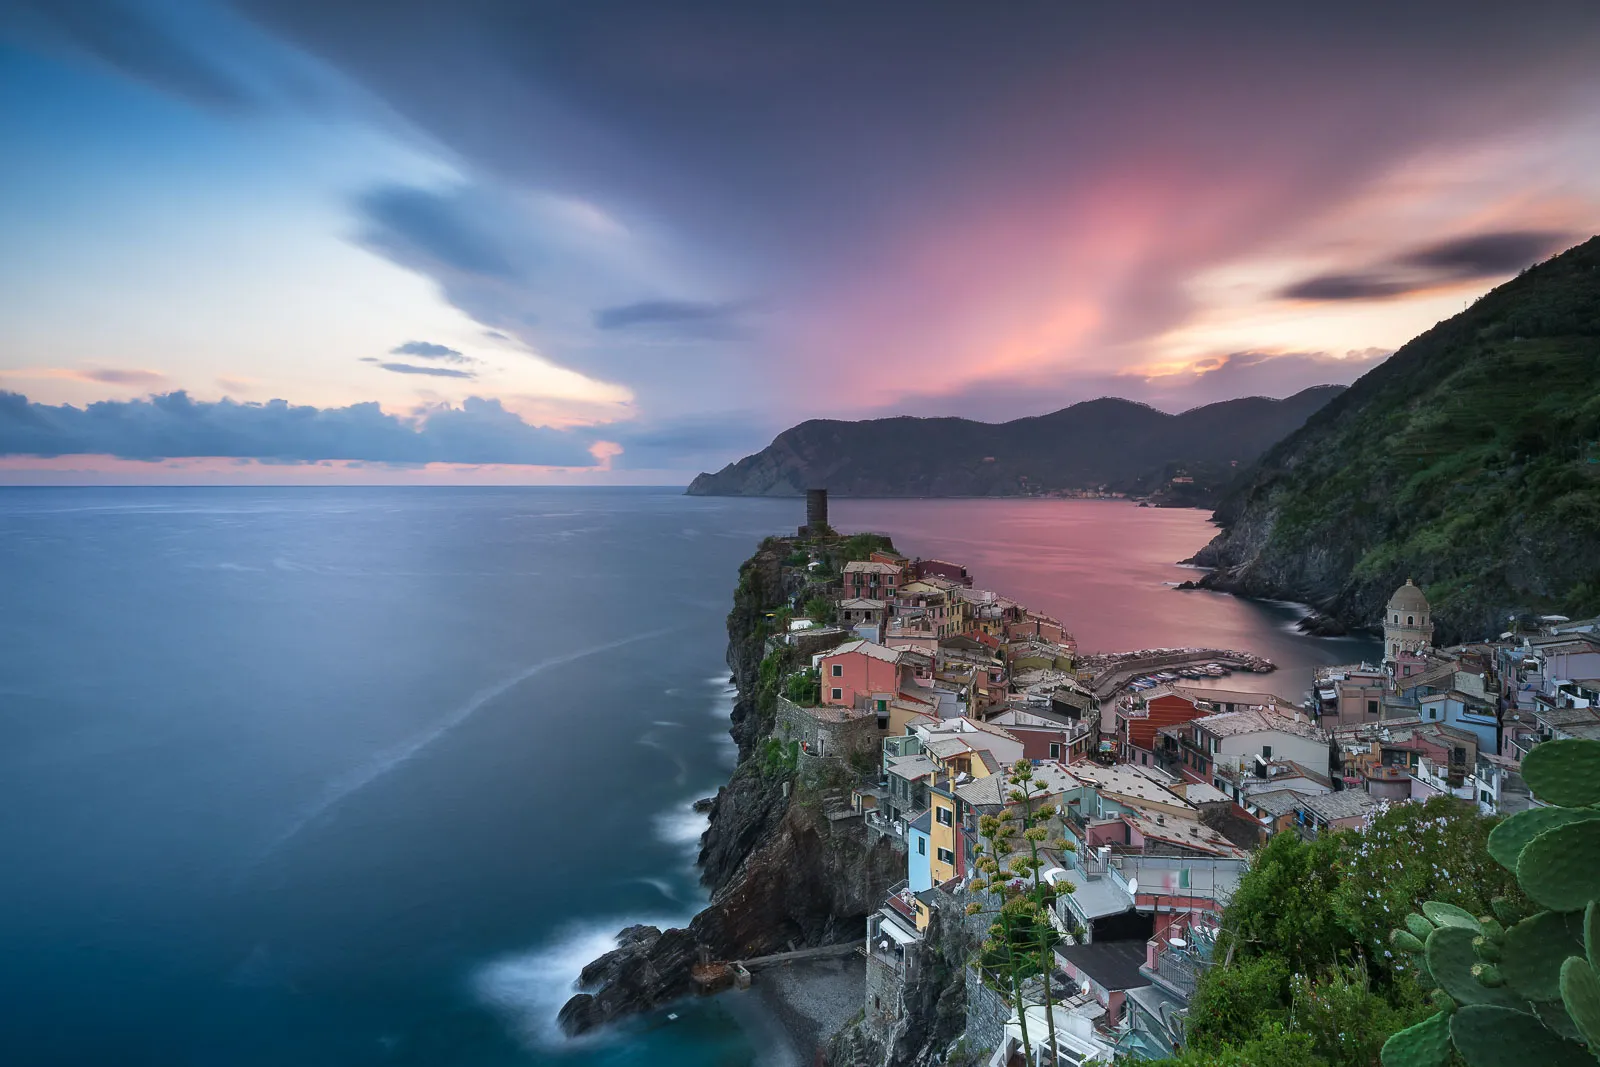 The classic view of Vernazza, Cinque Terre after sunset